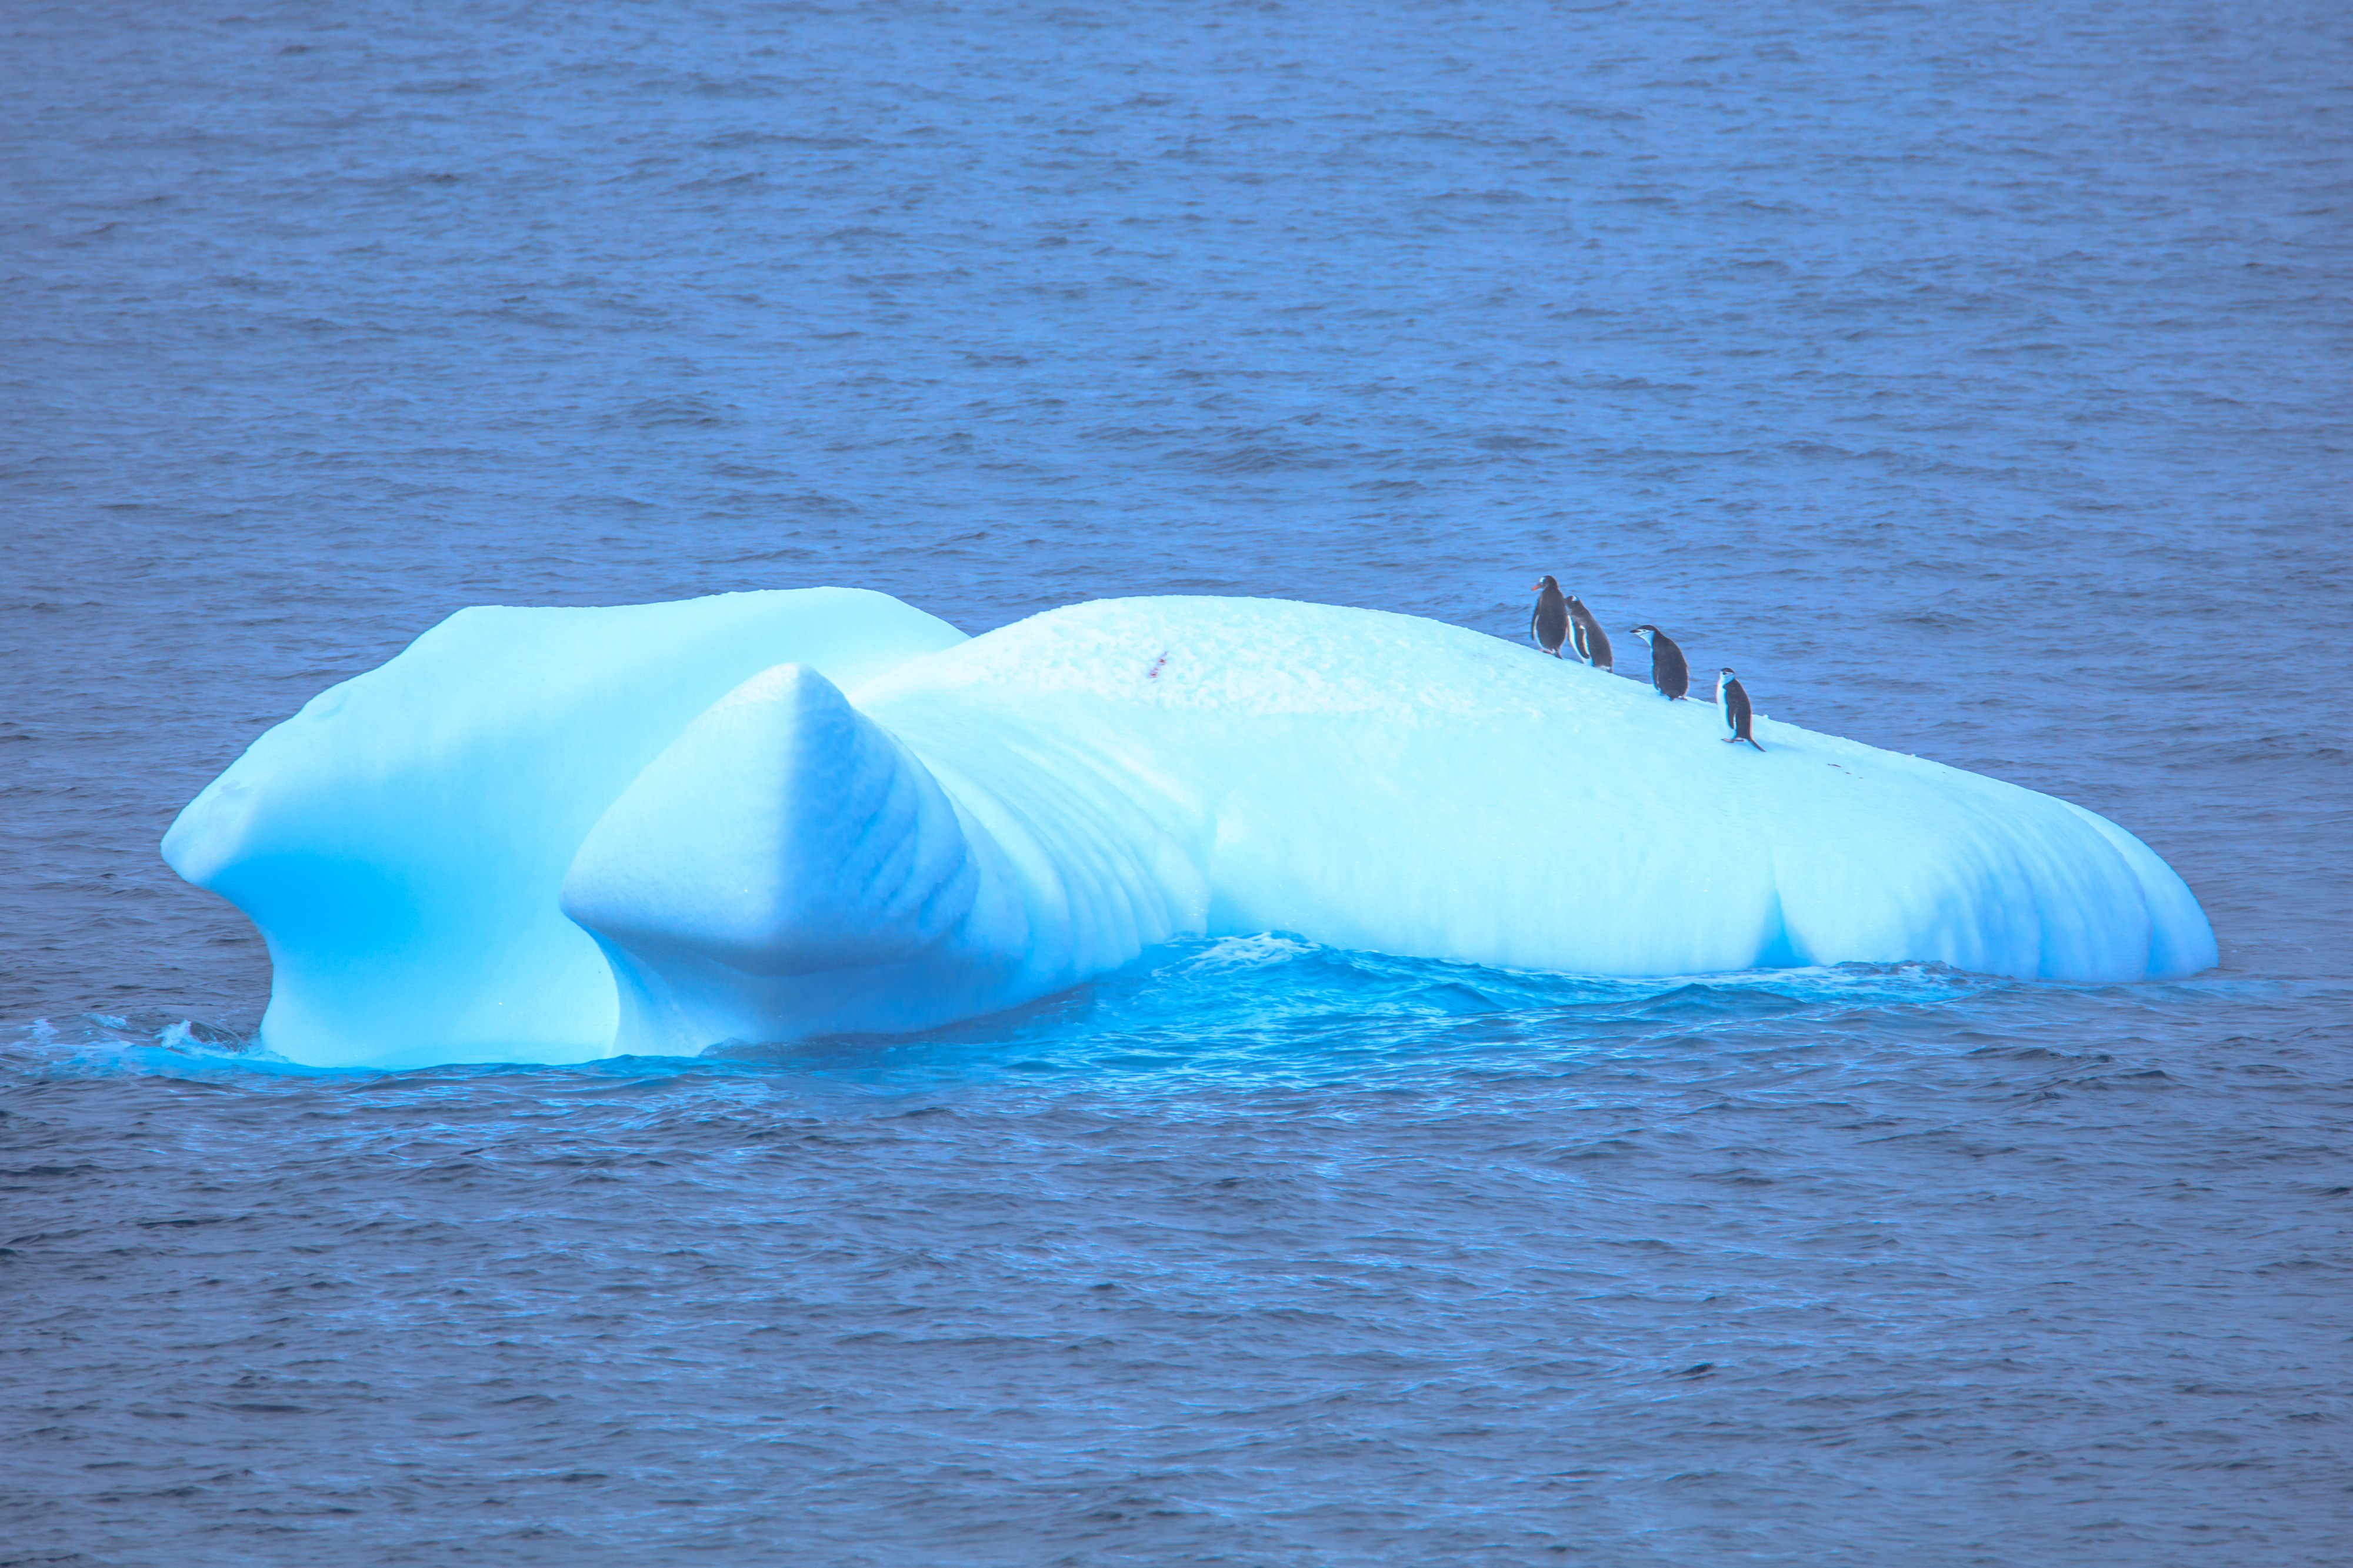 The first bergs and wildlife as we near the South Shetland Islands.Gentoo (Pygoscselis papua) & Chinstrap (Pygoscelis antarctica) Penguins riding ice chariot. (25877774432)